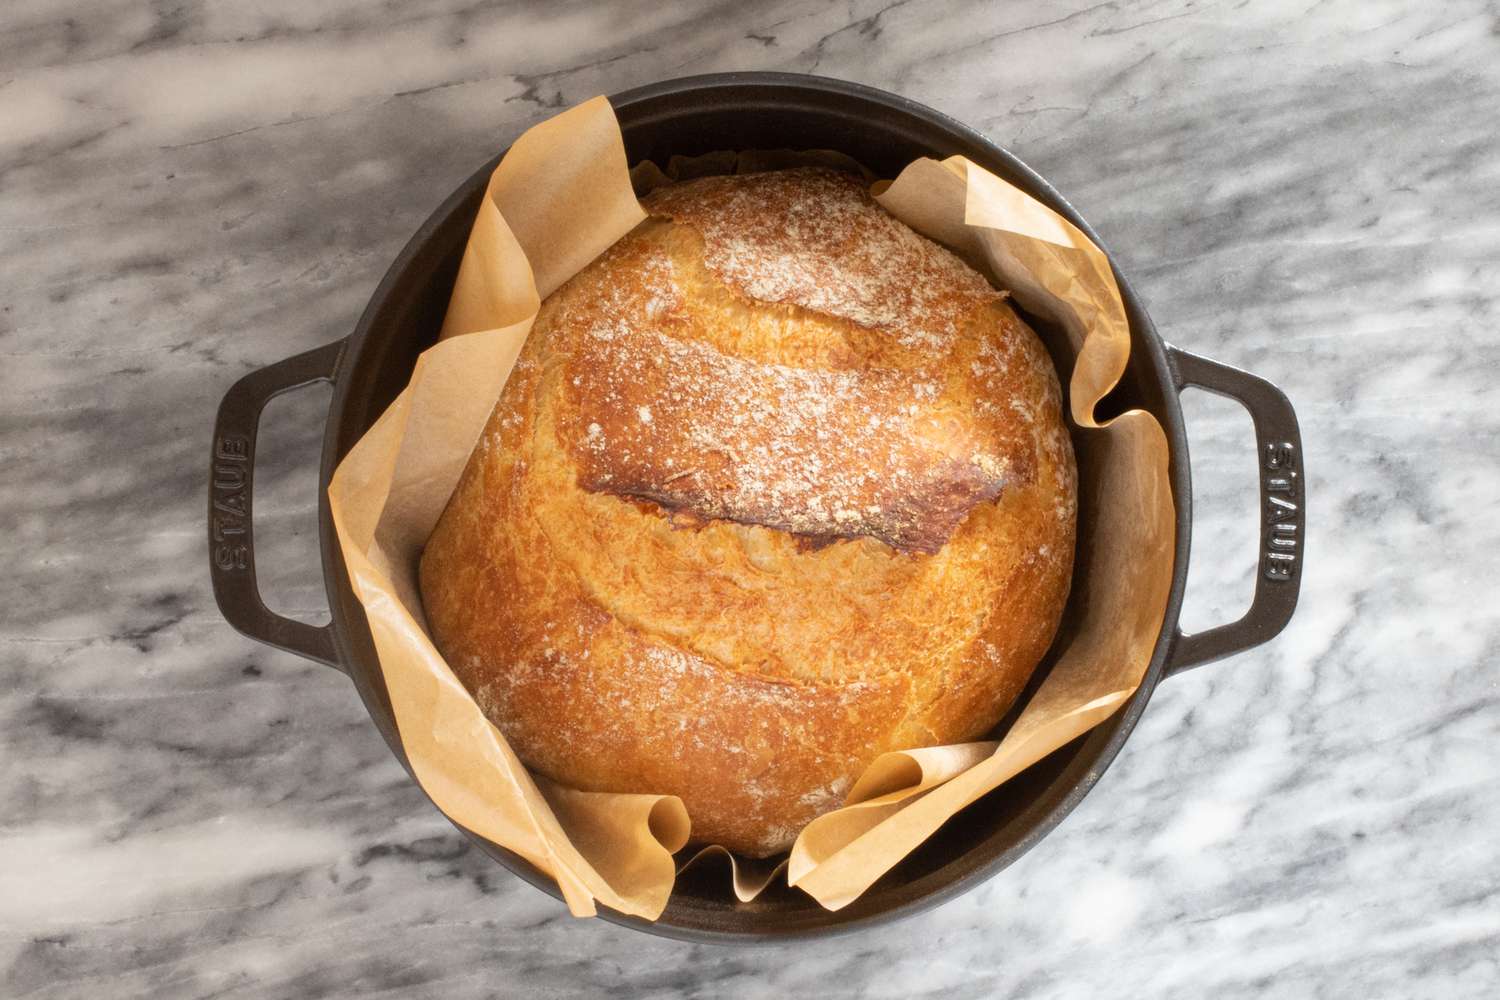 No-knead bread, baked in the Dutch oven